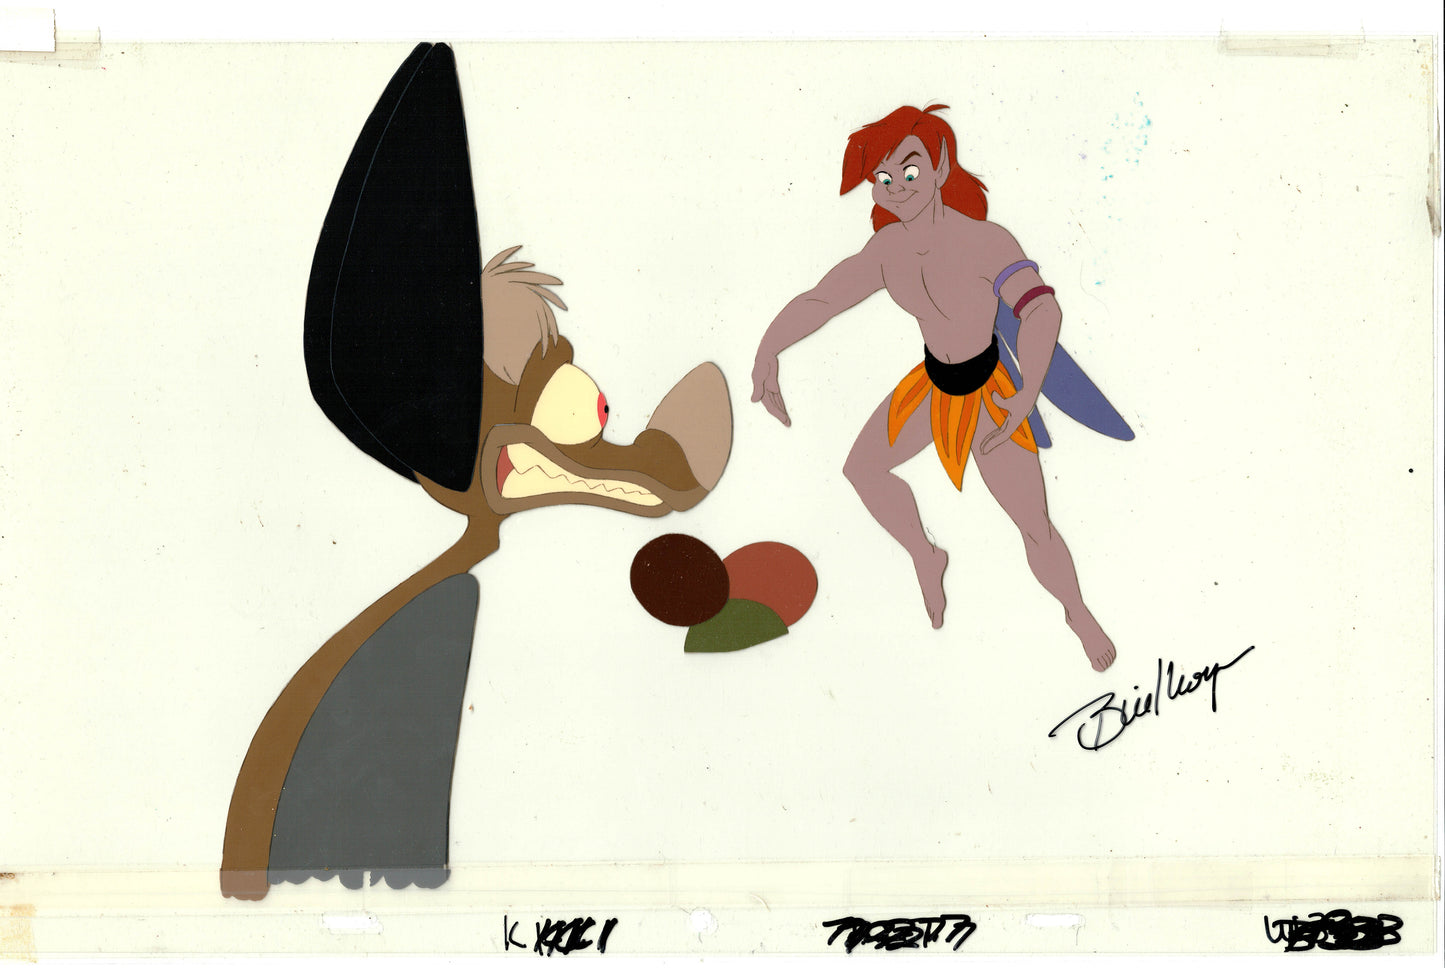 Ferngully Original Production Animation Cel Setup of Pips and Batty Koda with Original Production Background Signed by Bill Kroyer 1992